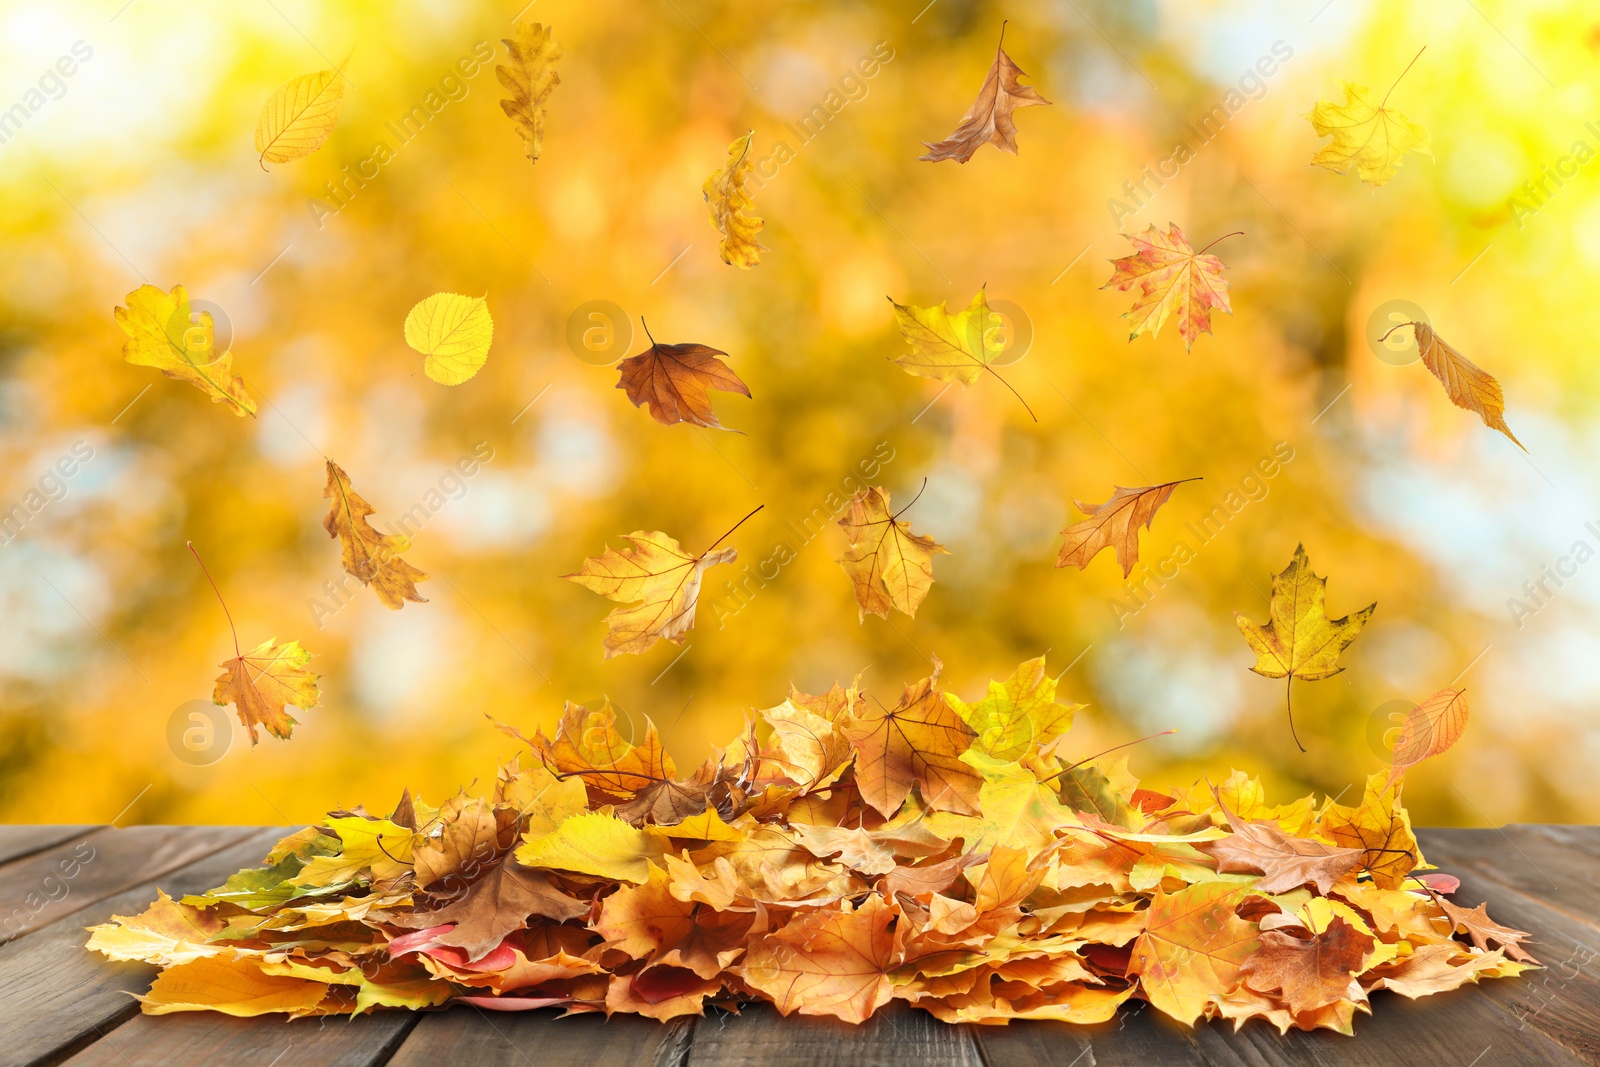 Image of Autumn leaves falling on wooden surface outdoors